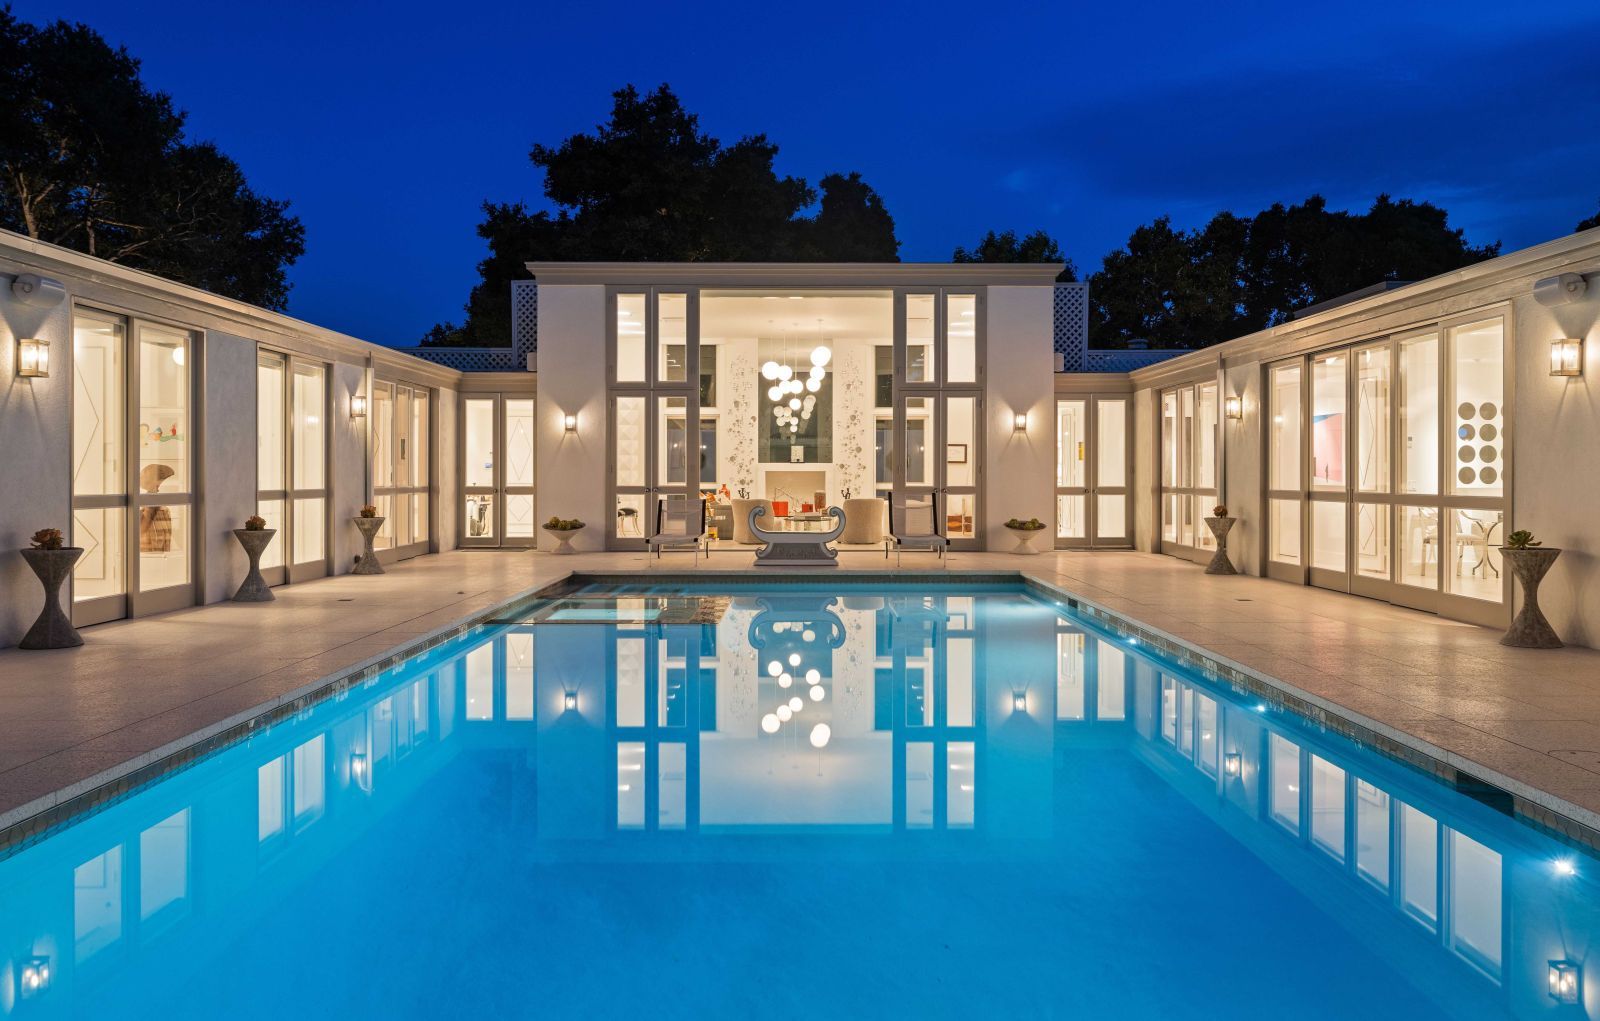 The courtyard pool of a mid-century modern estate, with the lapis-colored pool embraced by wings of the home with walls of glass